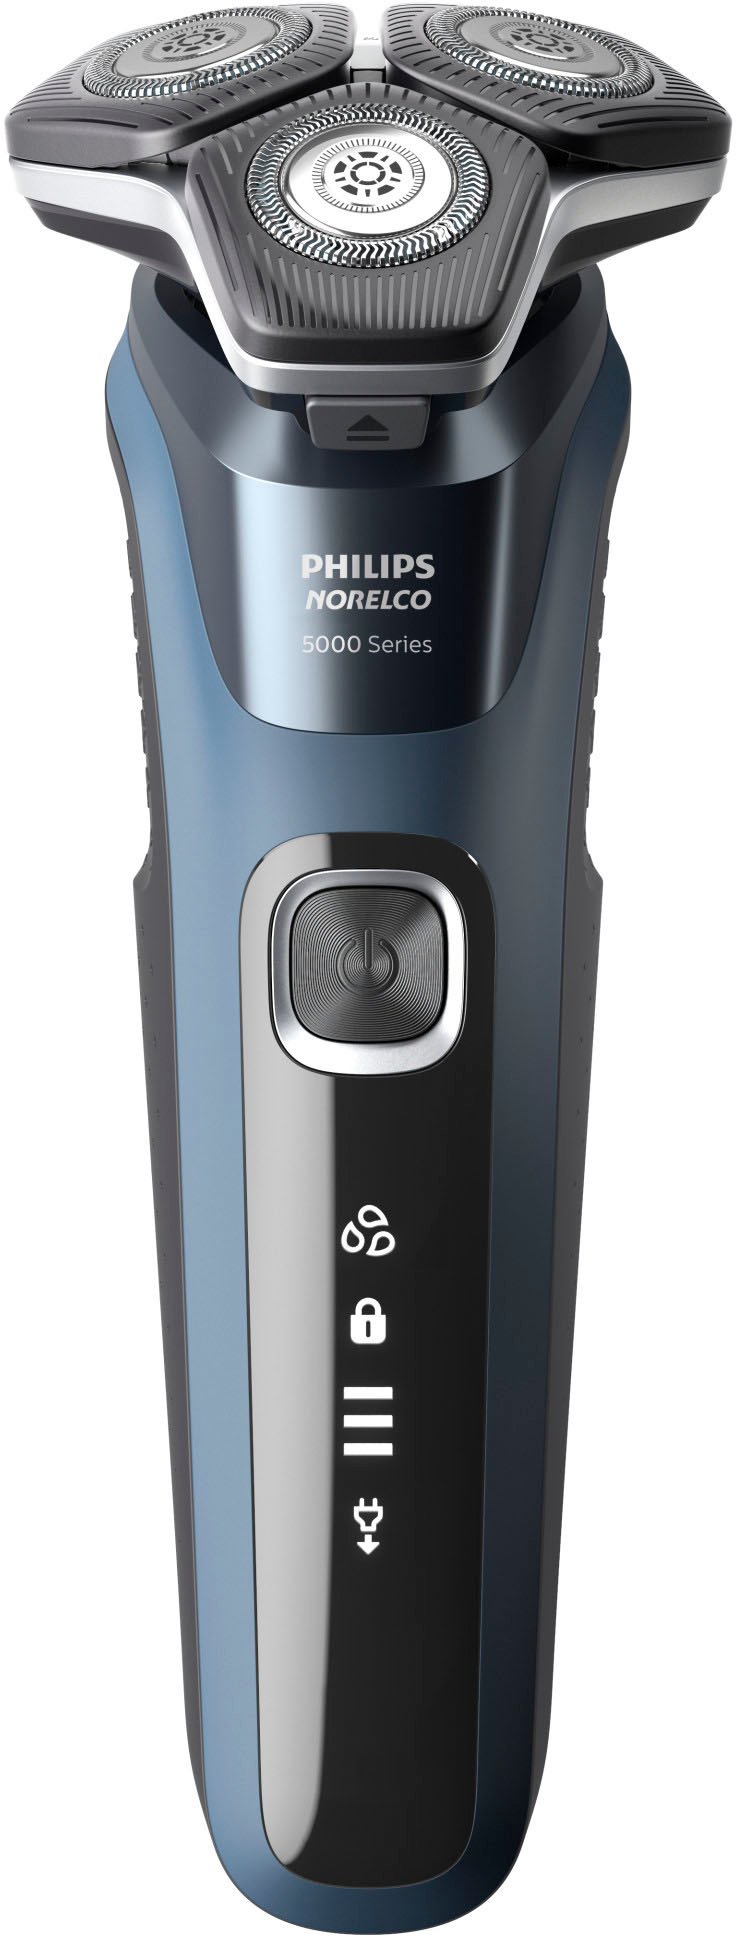 Essentially Plow Empower Philips Norelco Shaver 5400, Rechargeable Wet & Dry Shaver with Pop-Up  Trimmer, S5880/81 Blue S5880/81 - Best Buy